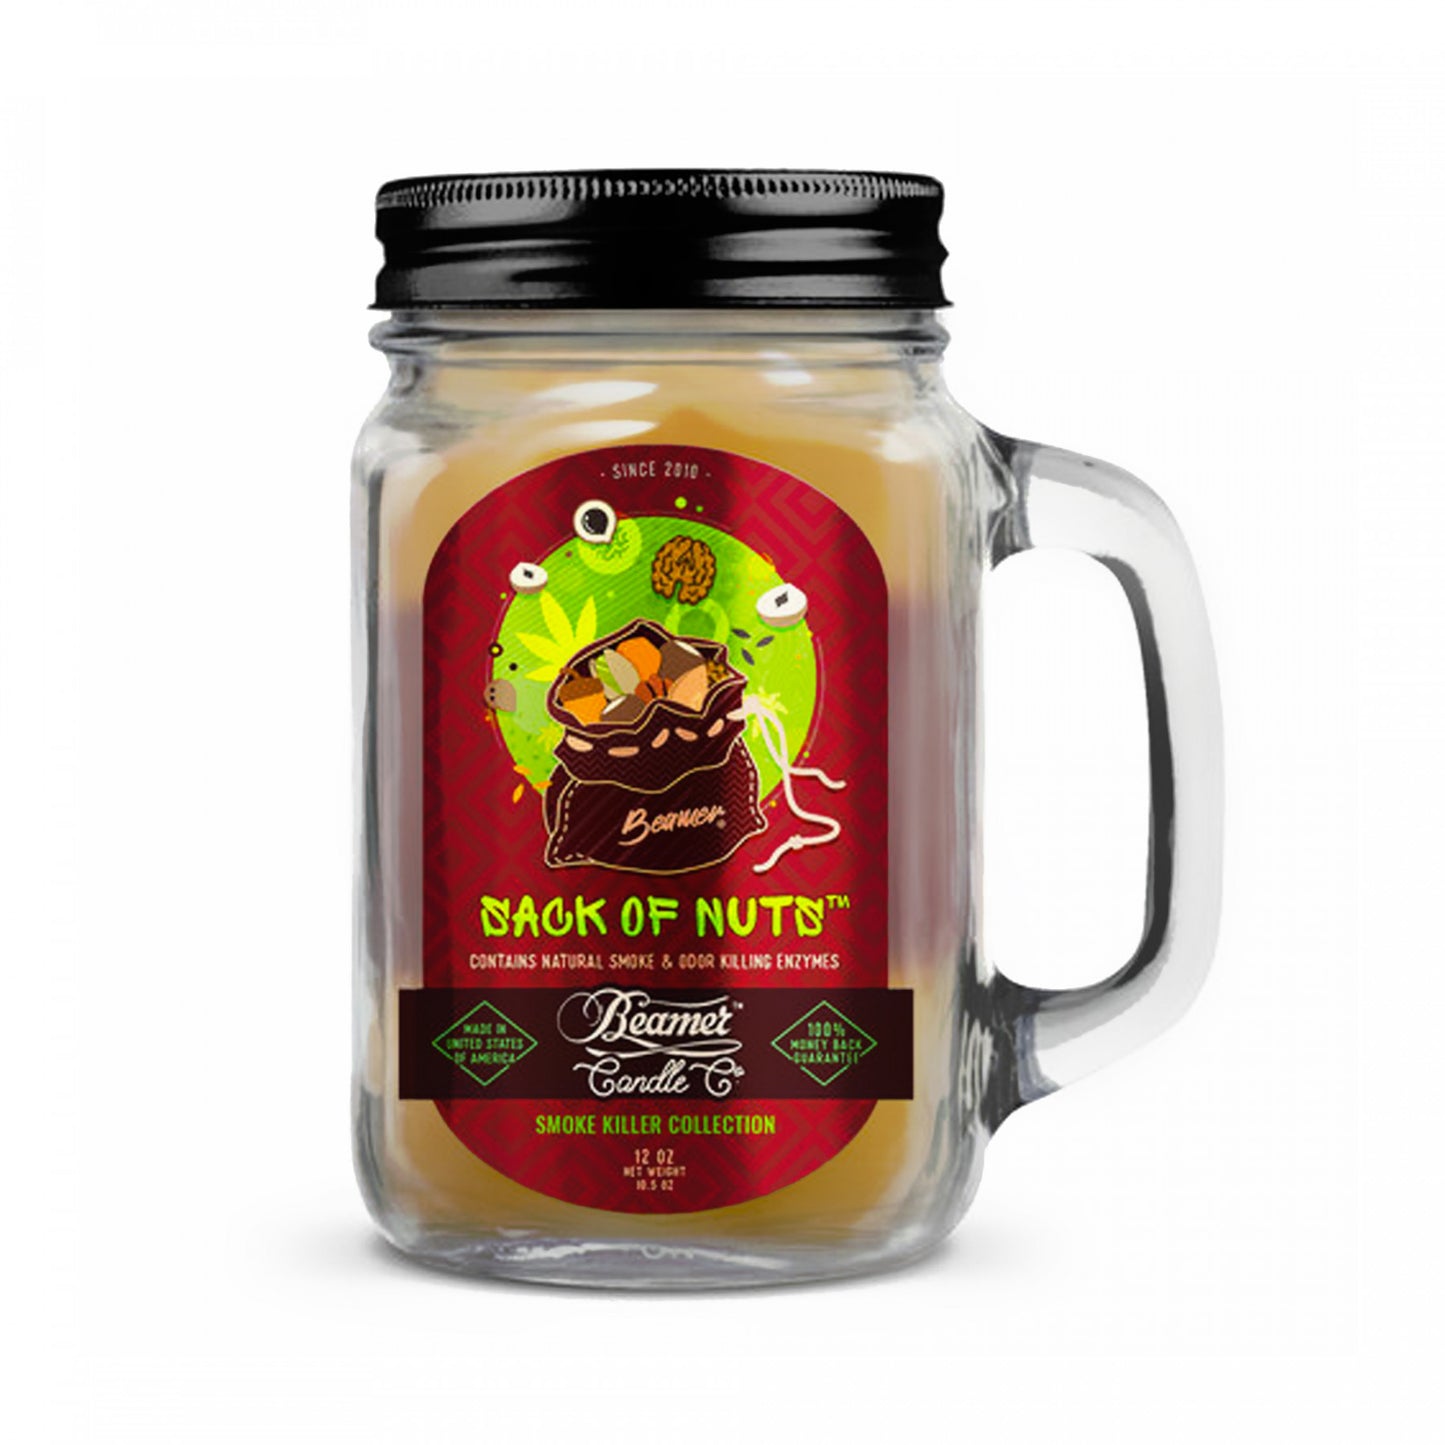 Sack Of Nuts Candle